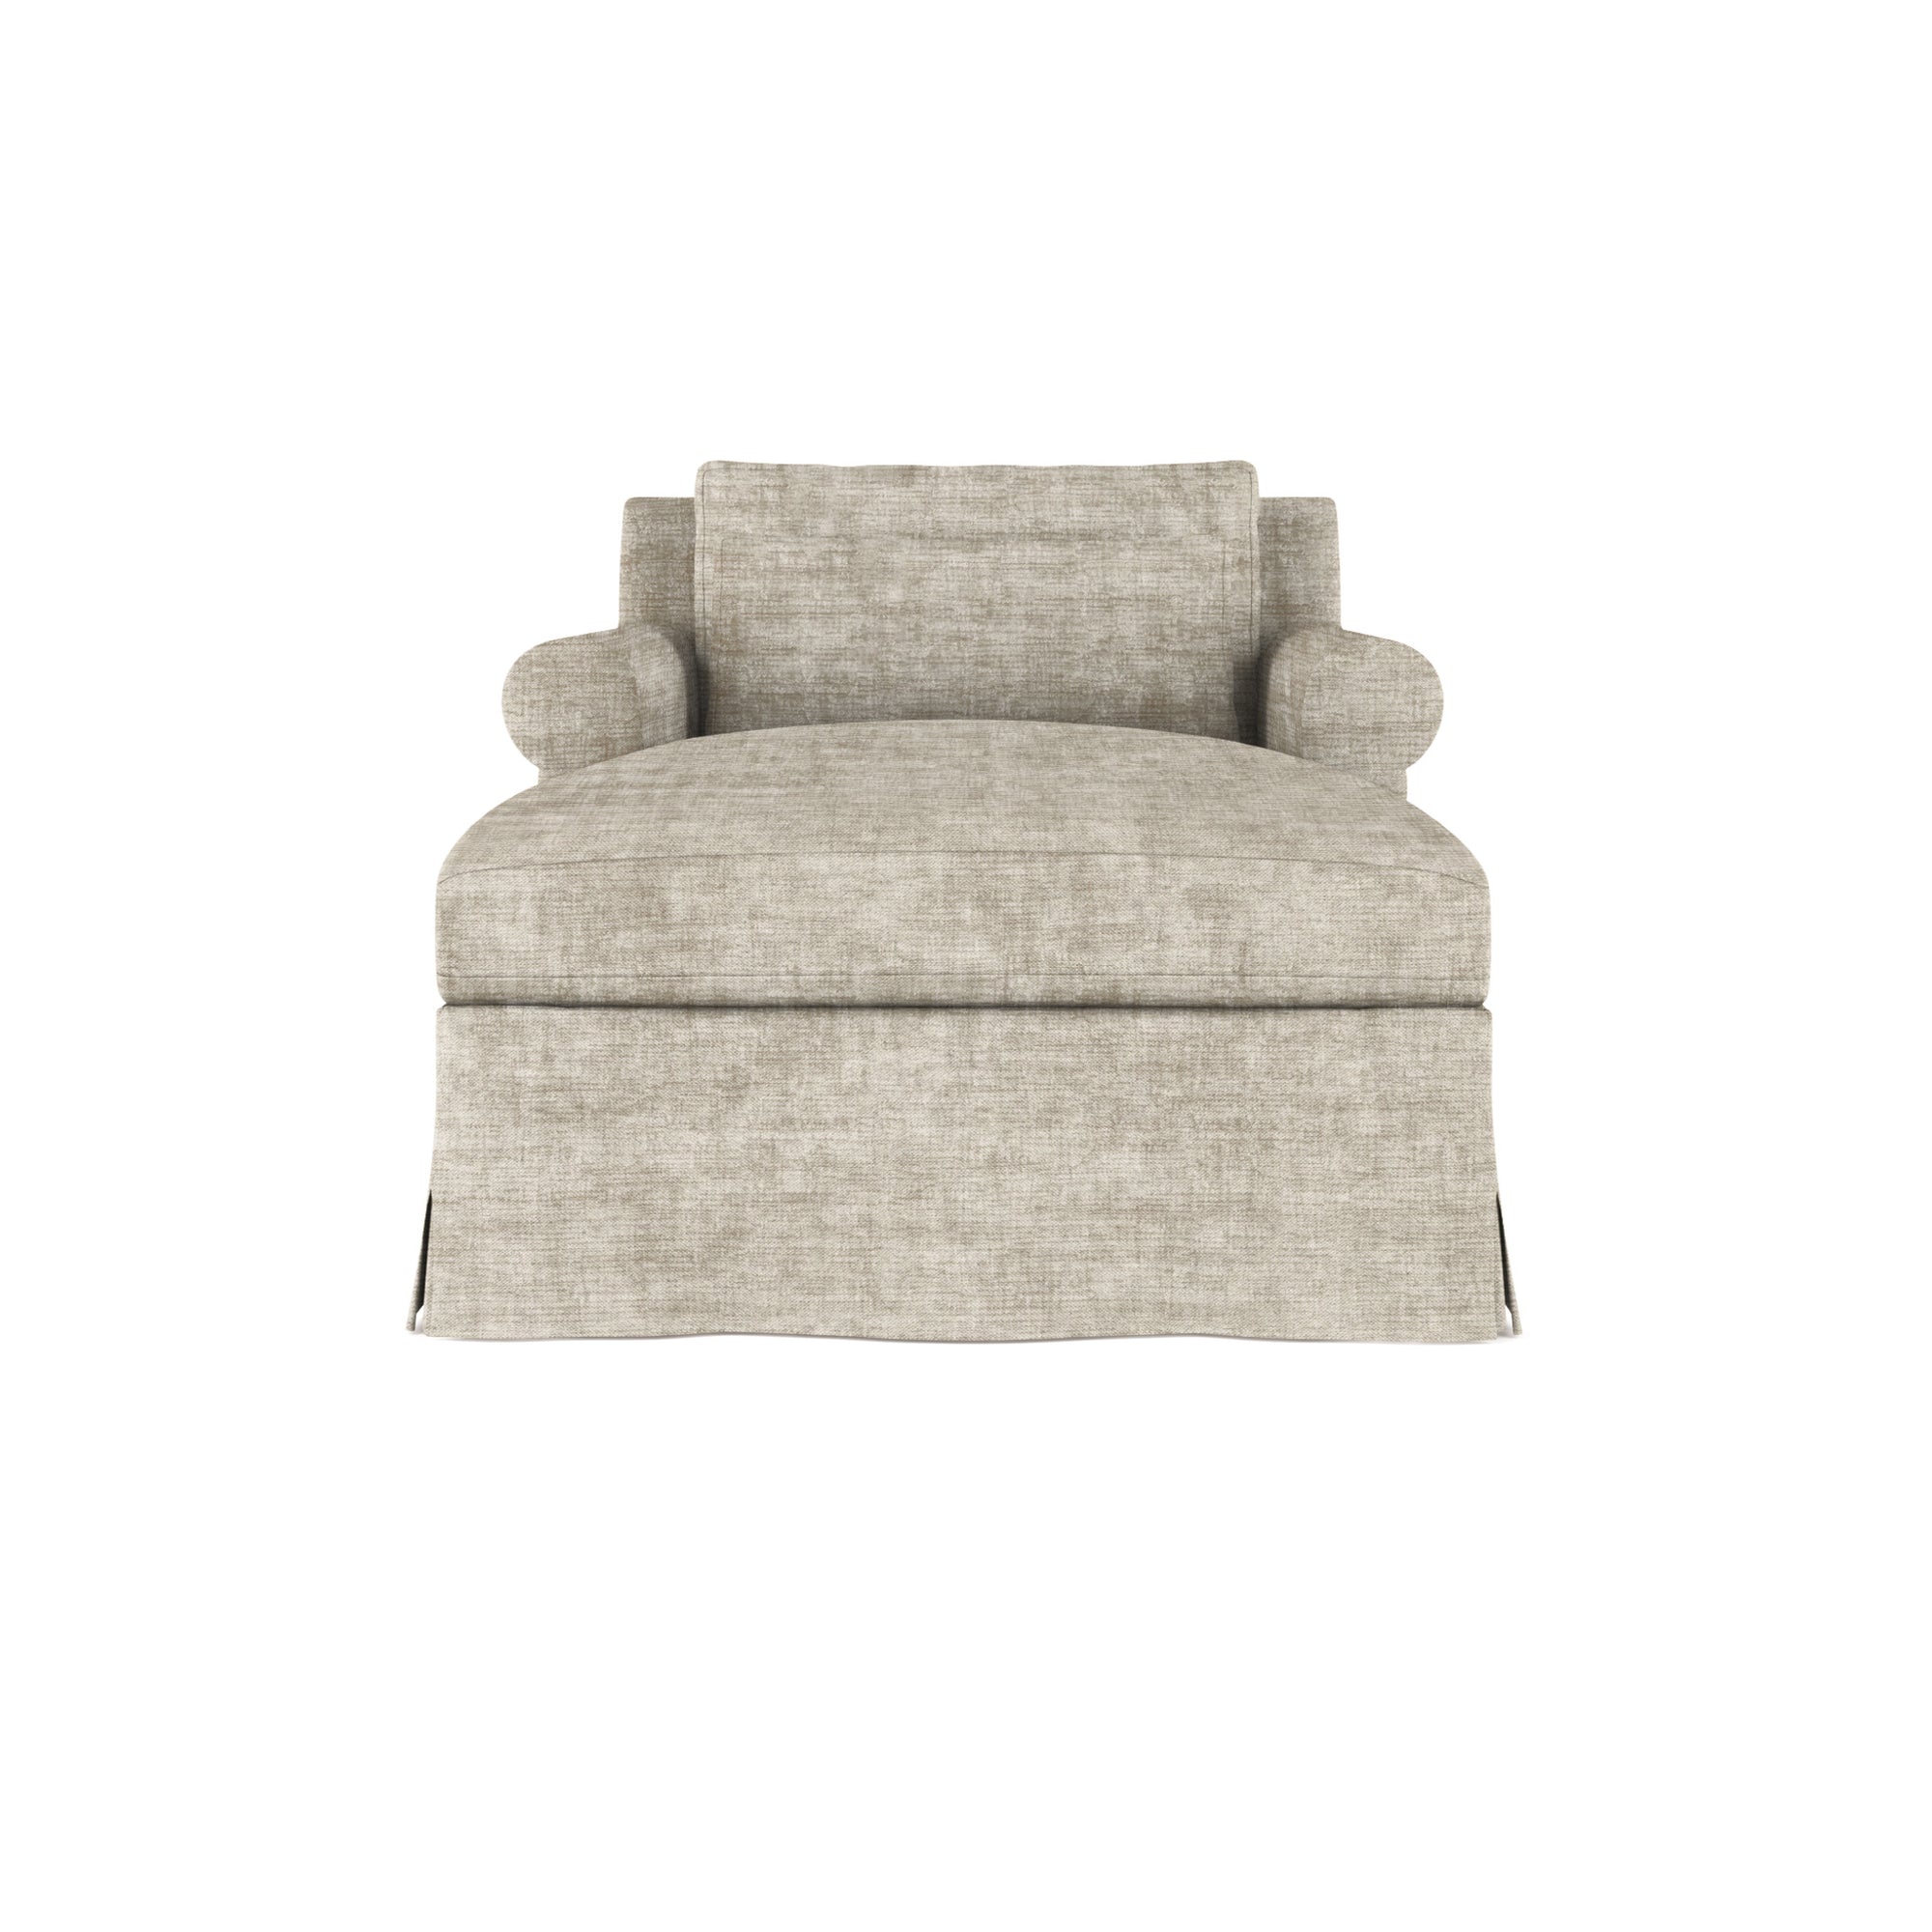 Ludlow Chaise - Oyster Crushed Velvet